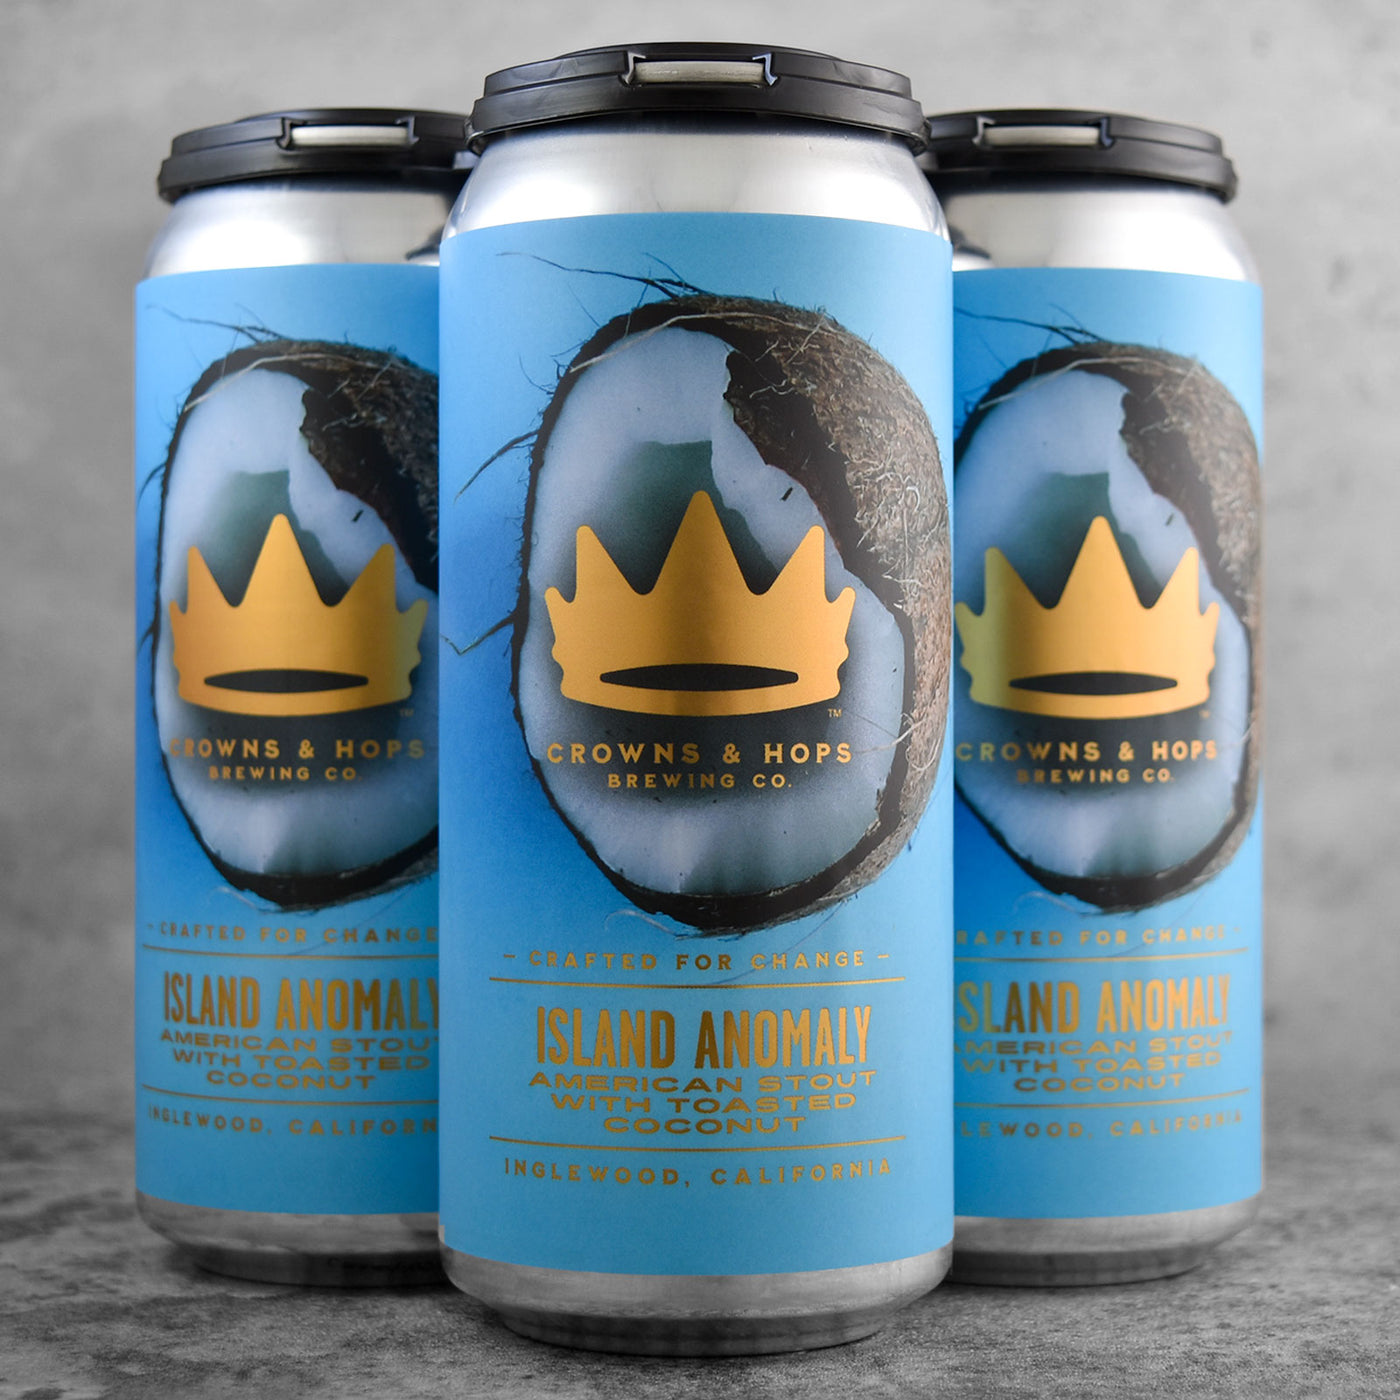 Crowns & Hops Island Anomaly